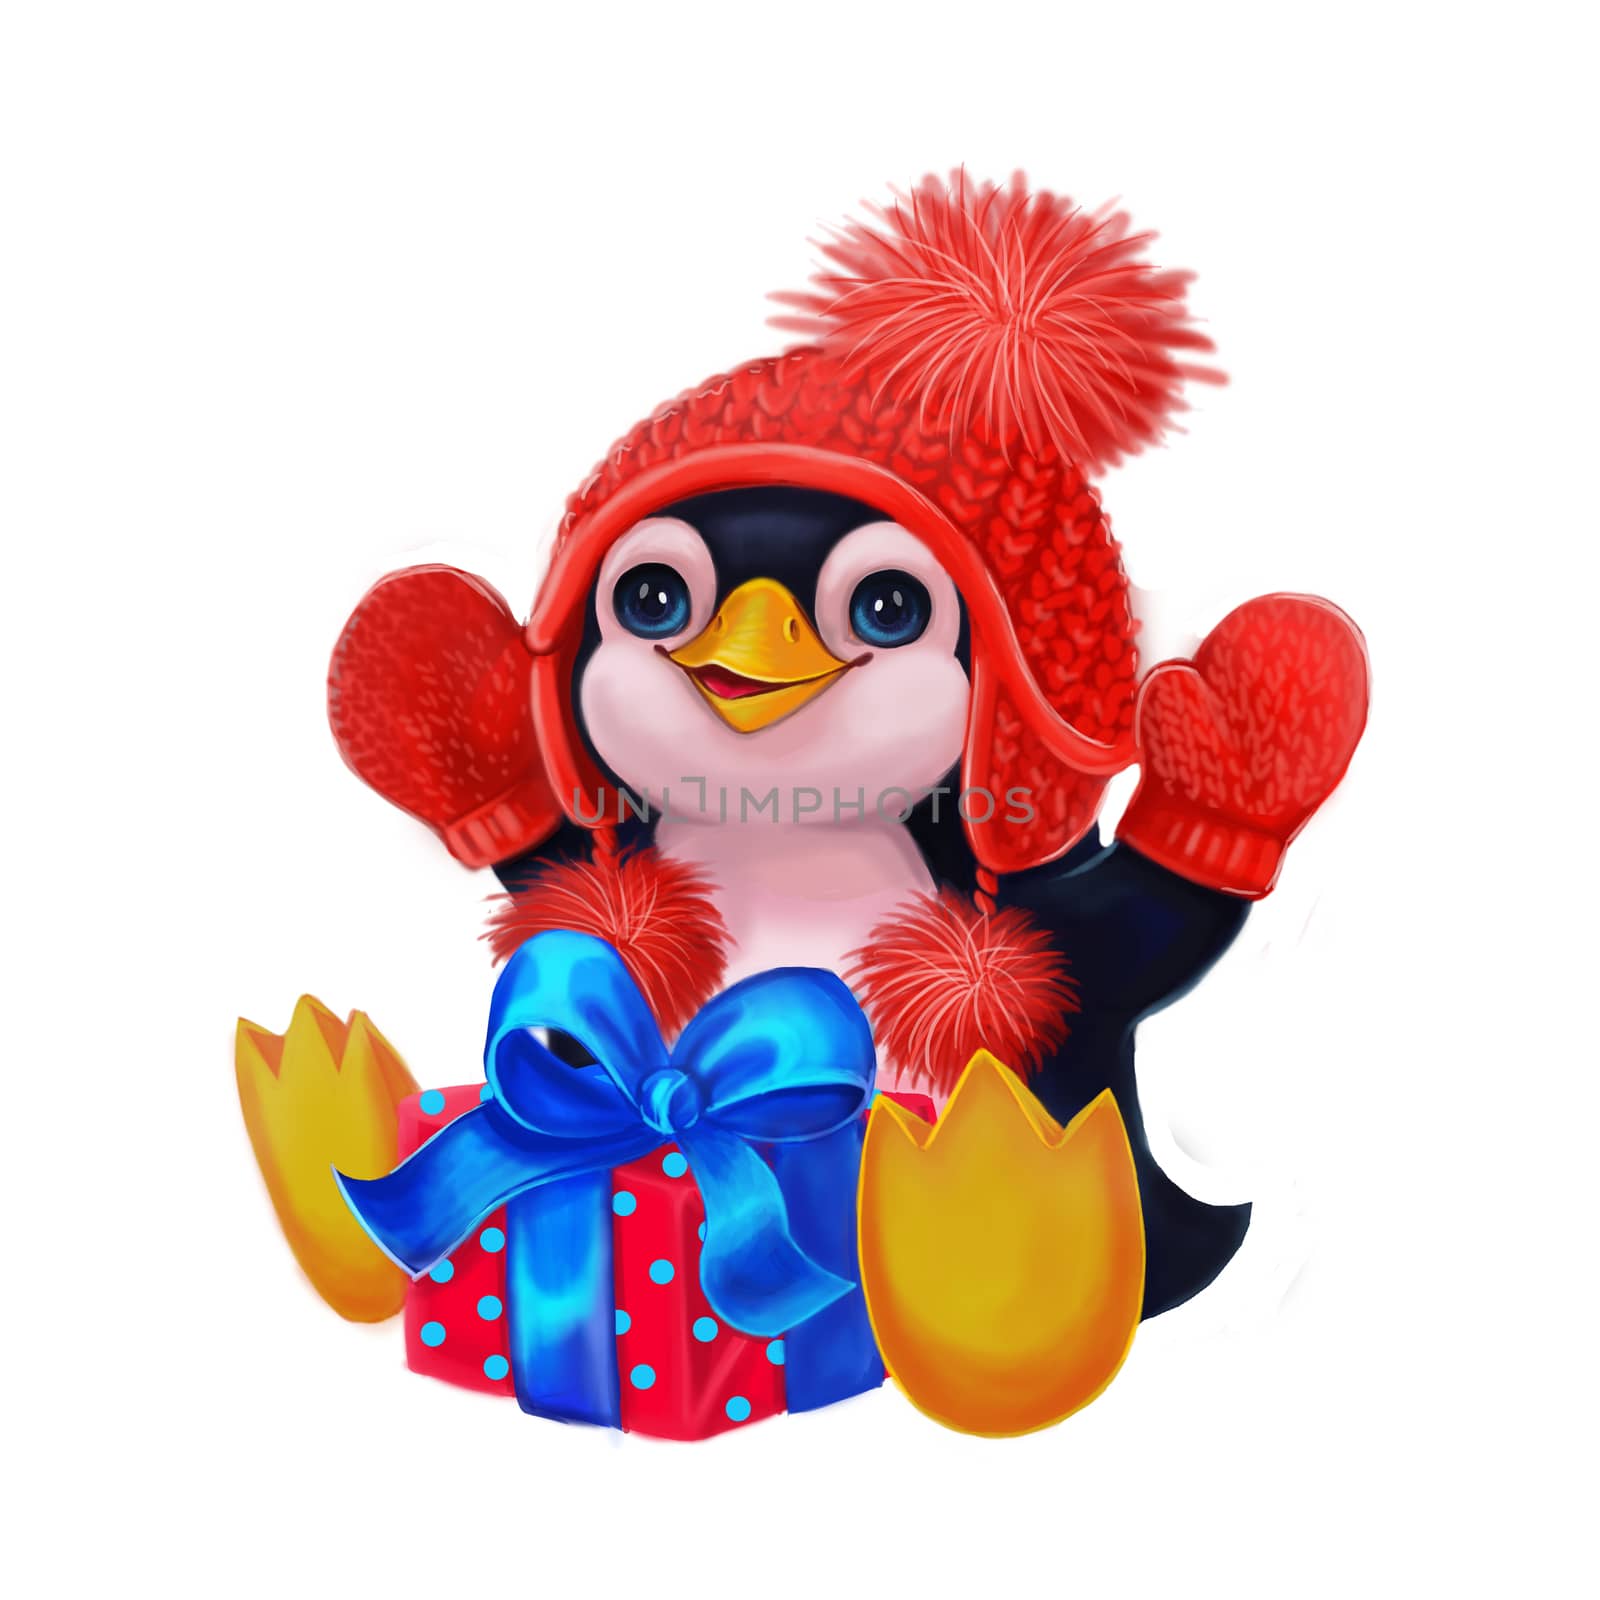 Happy Holidays with Penguin Celebrating Birthday Party, Christmas with Presents by Loud-Mango